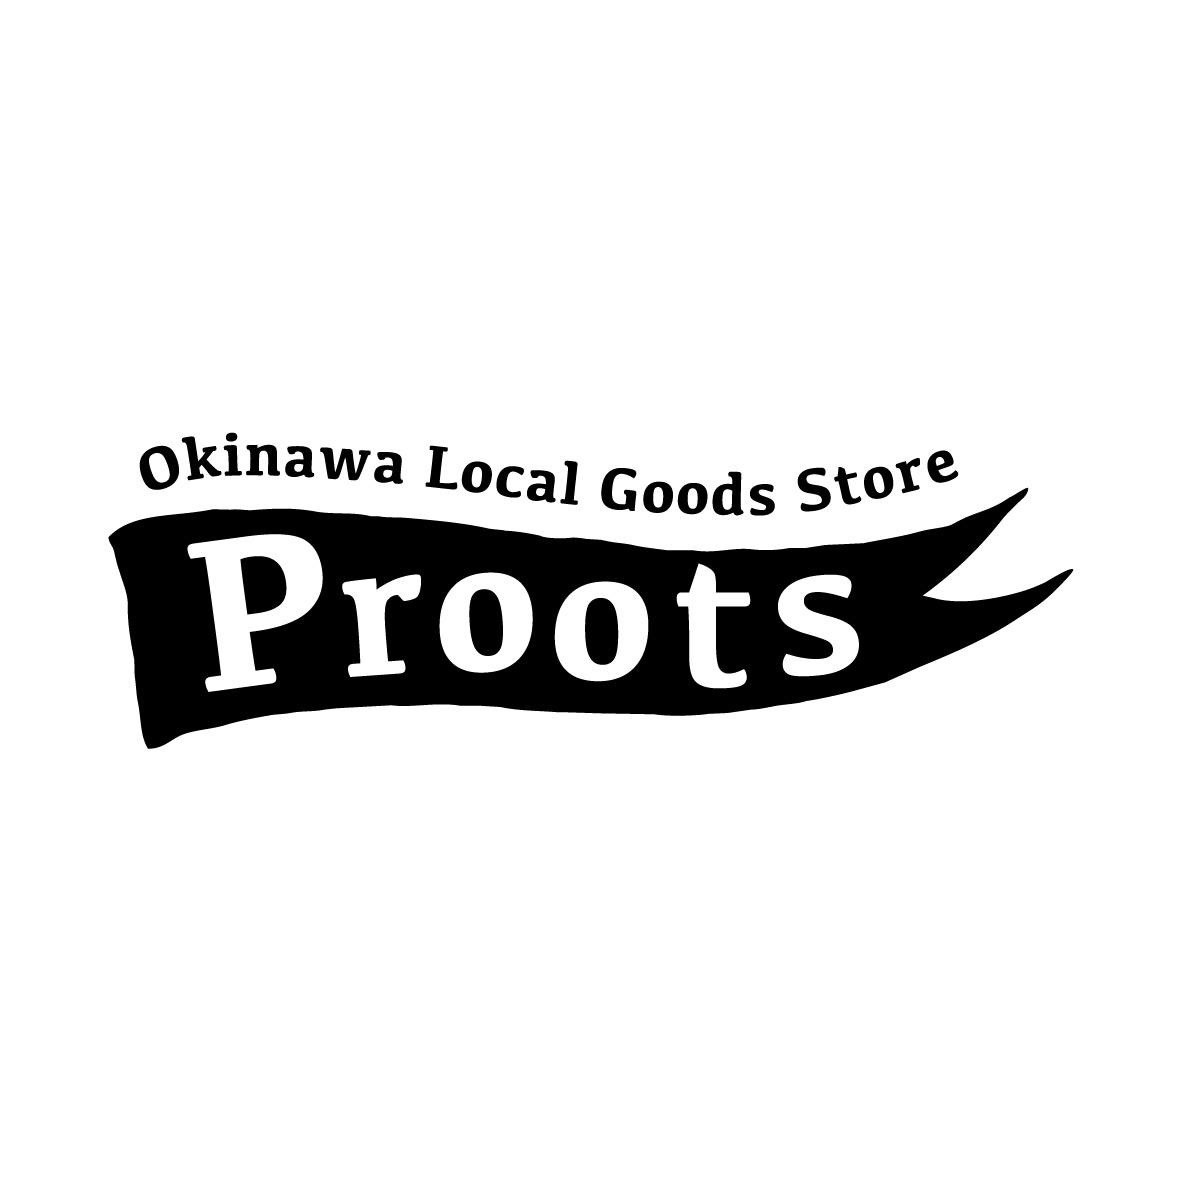 Proots   -okinawa local goods store-